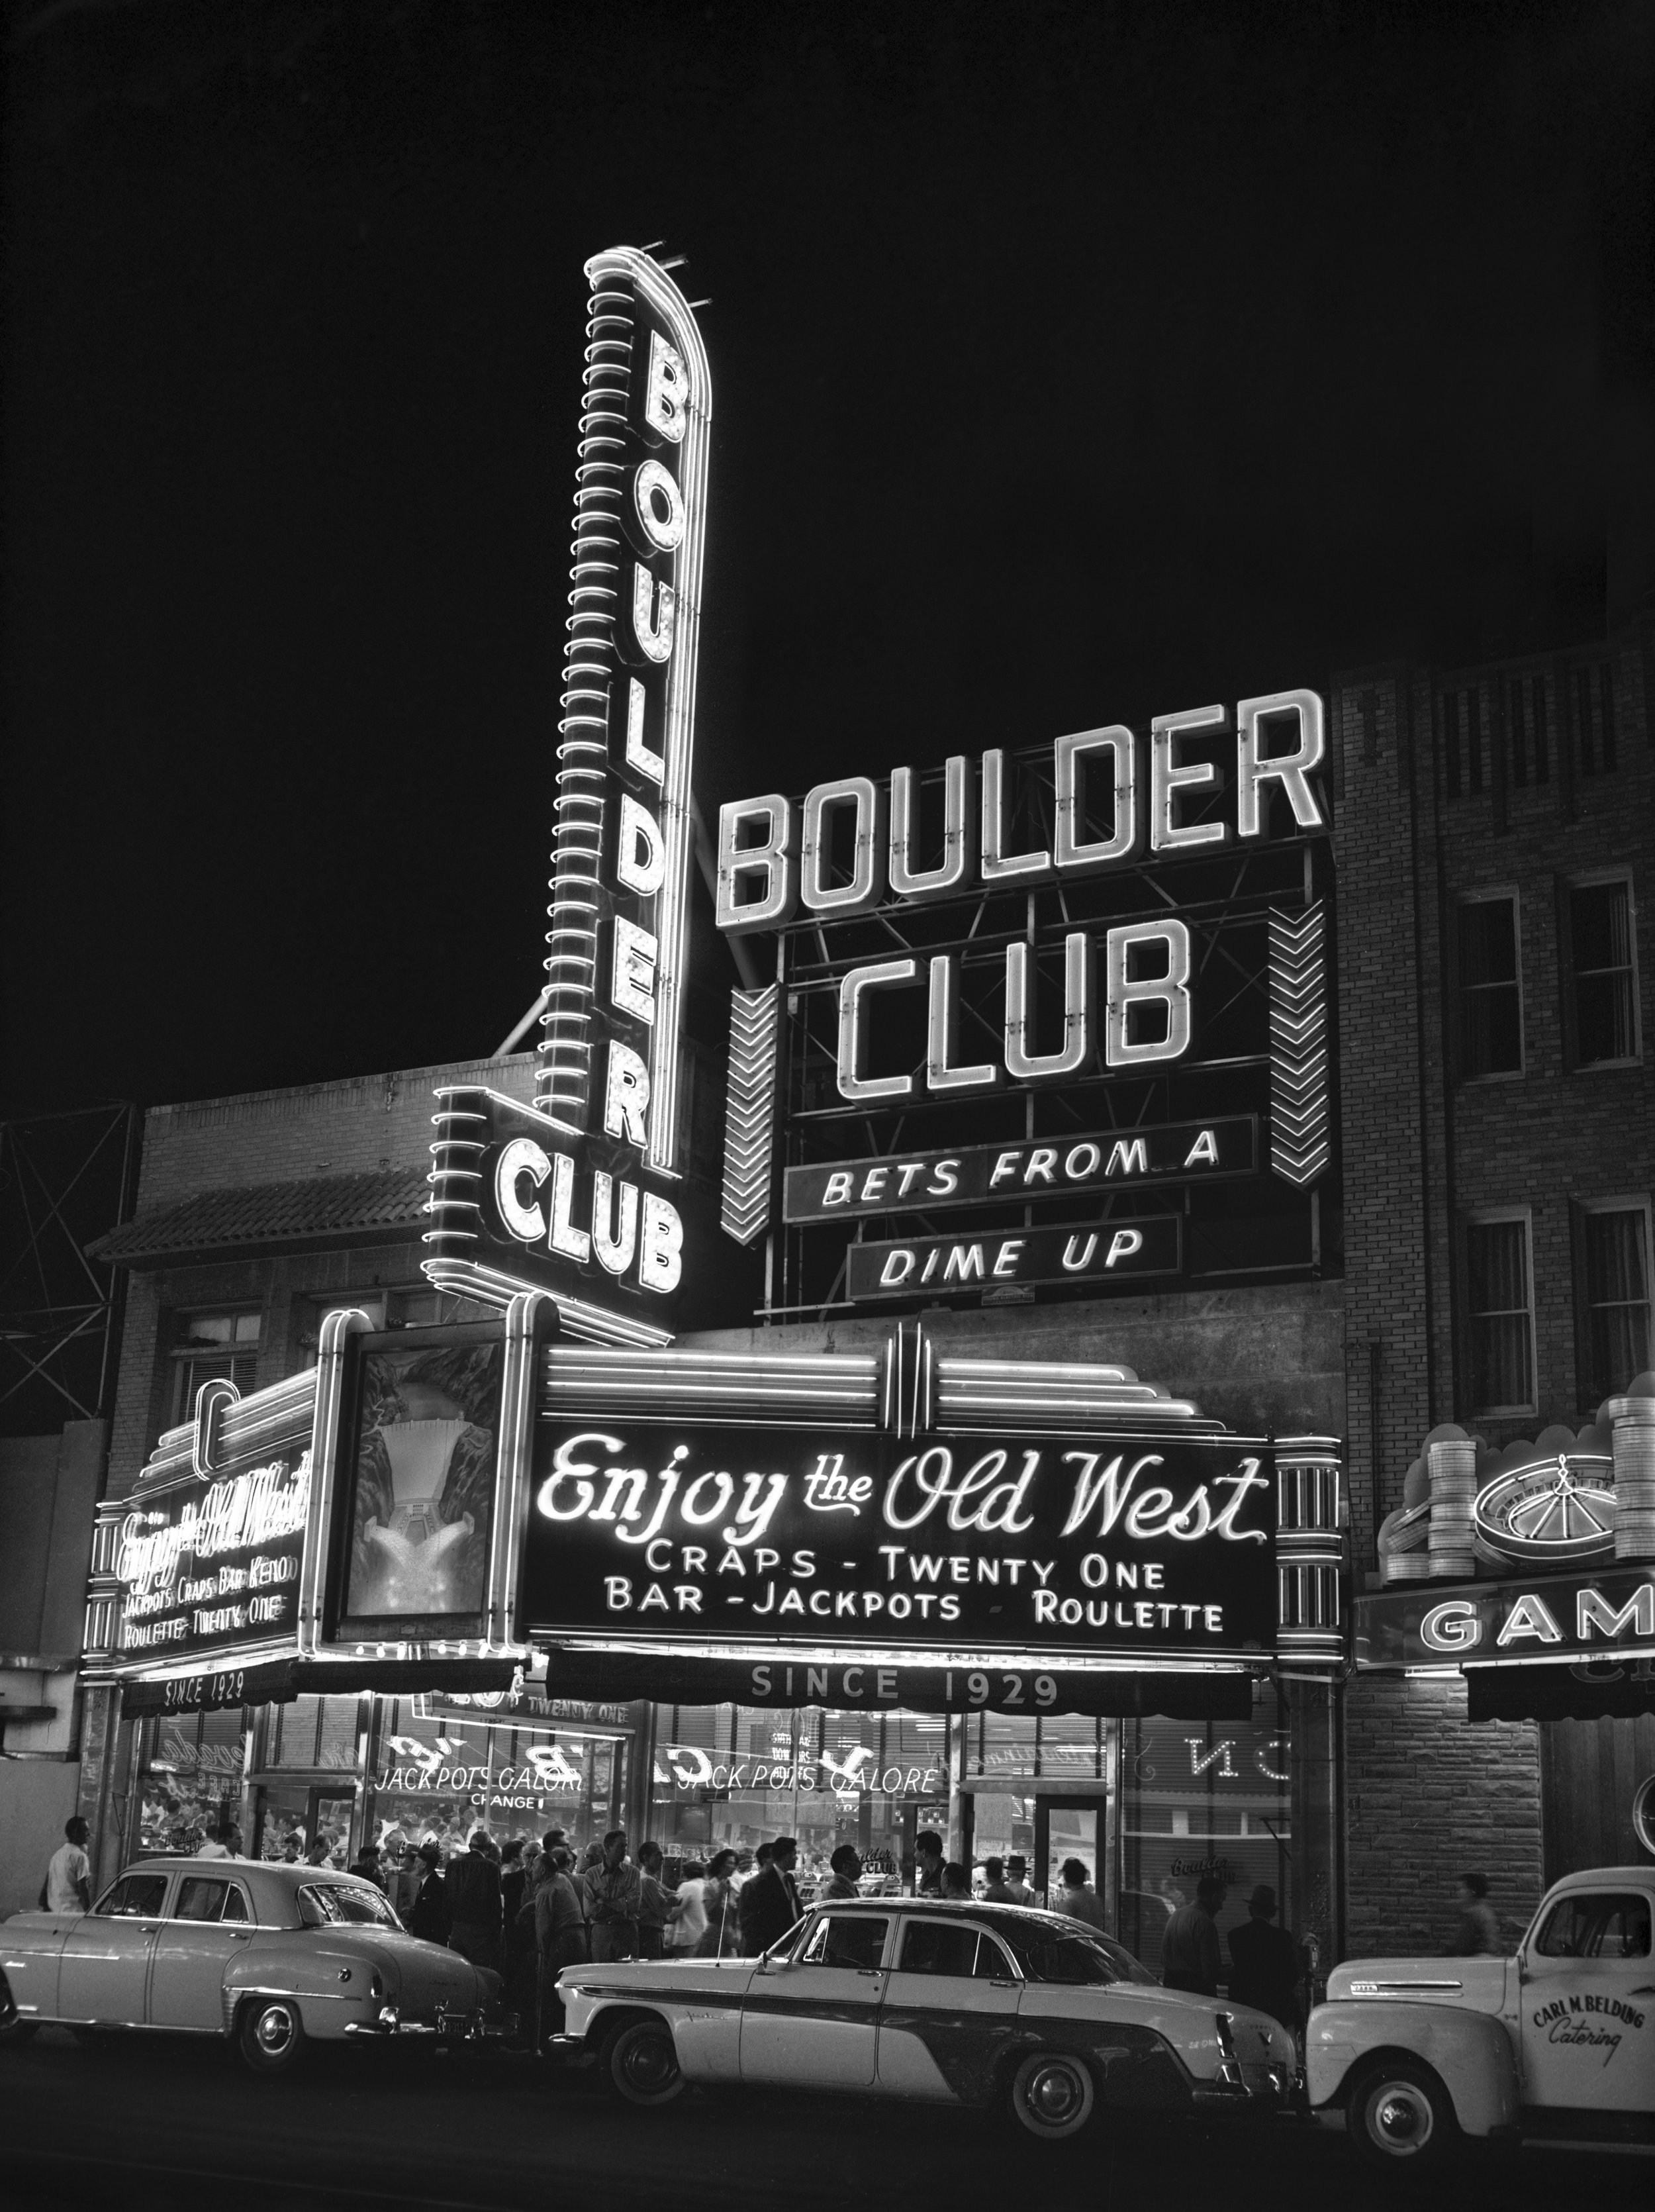  In 1945, the Boulder Club hired YESCO to redesign its 1933 sign. The new sign, credited as the first “spectacular,” combined a tall vertical tower that read “Boulder Club” and “Enjoy the Old West.” The sign industry used the term “spectacular” to re